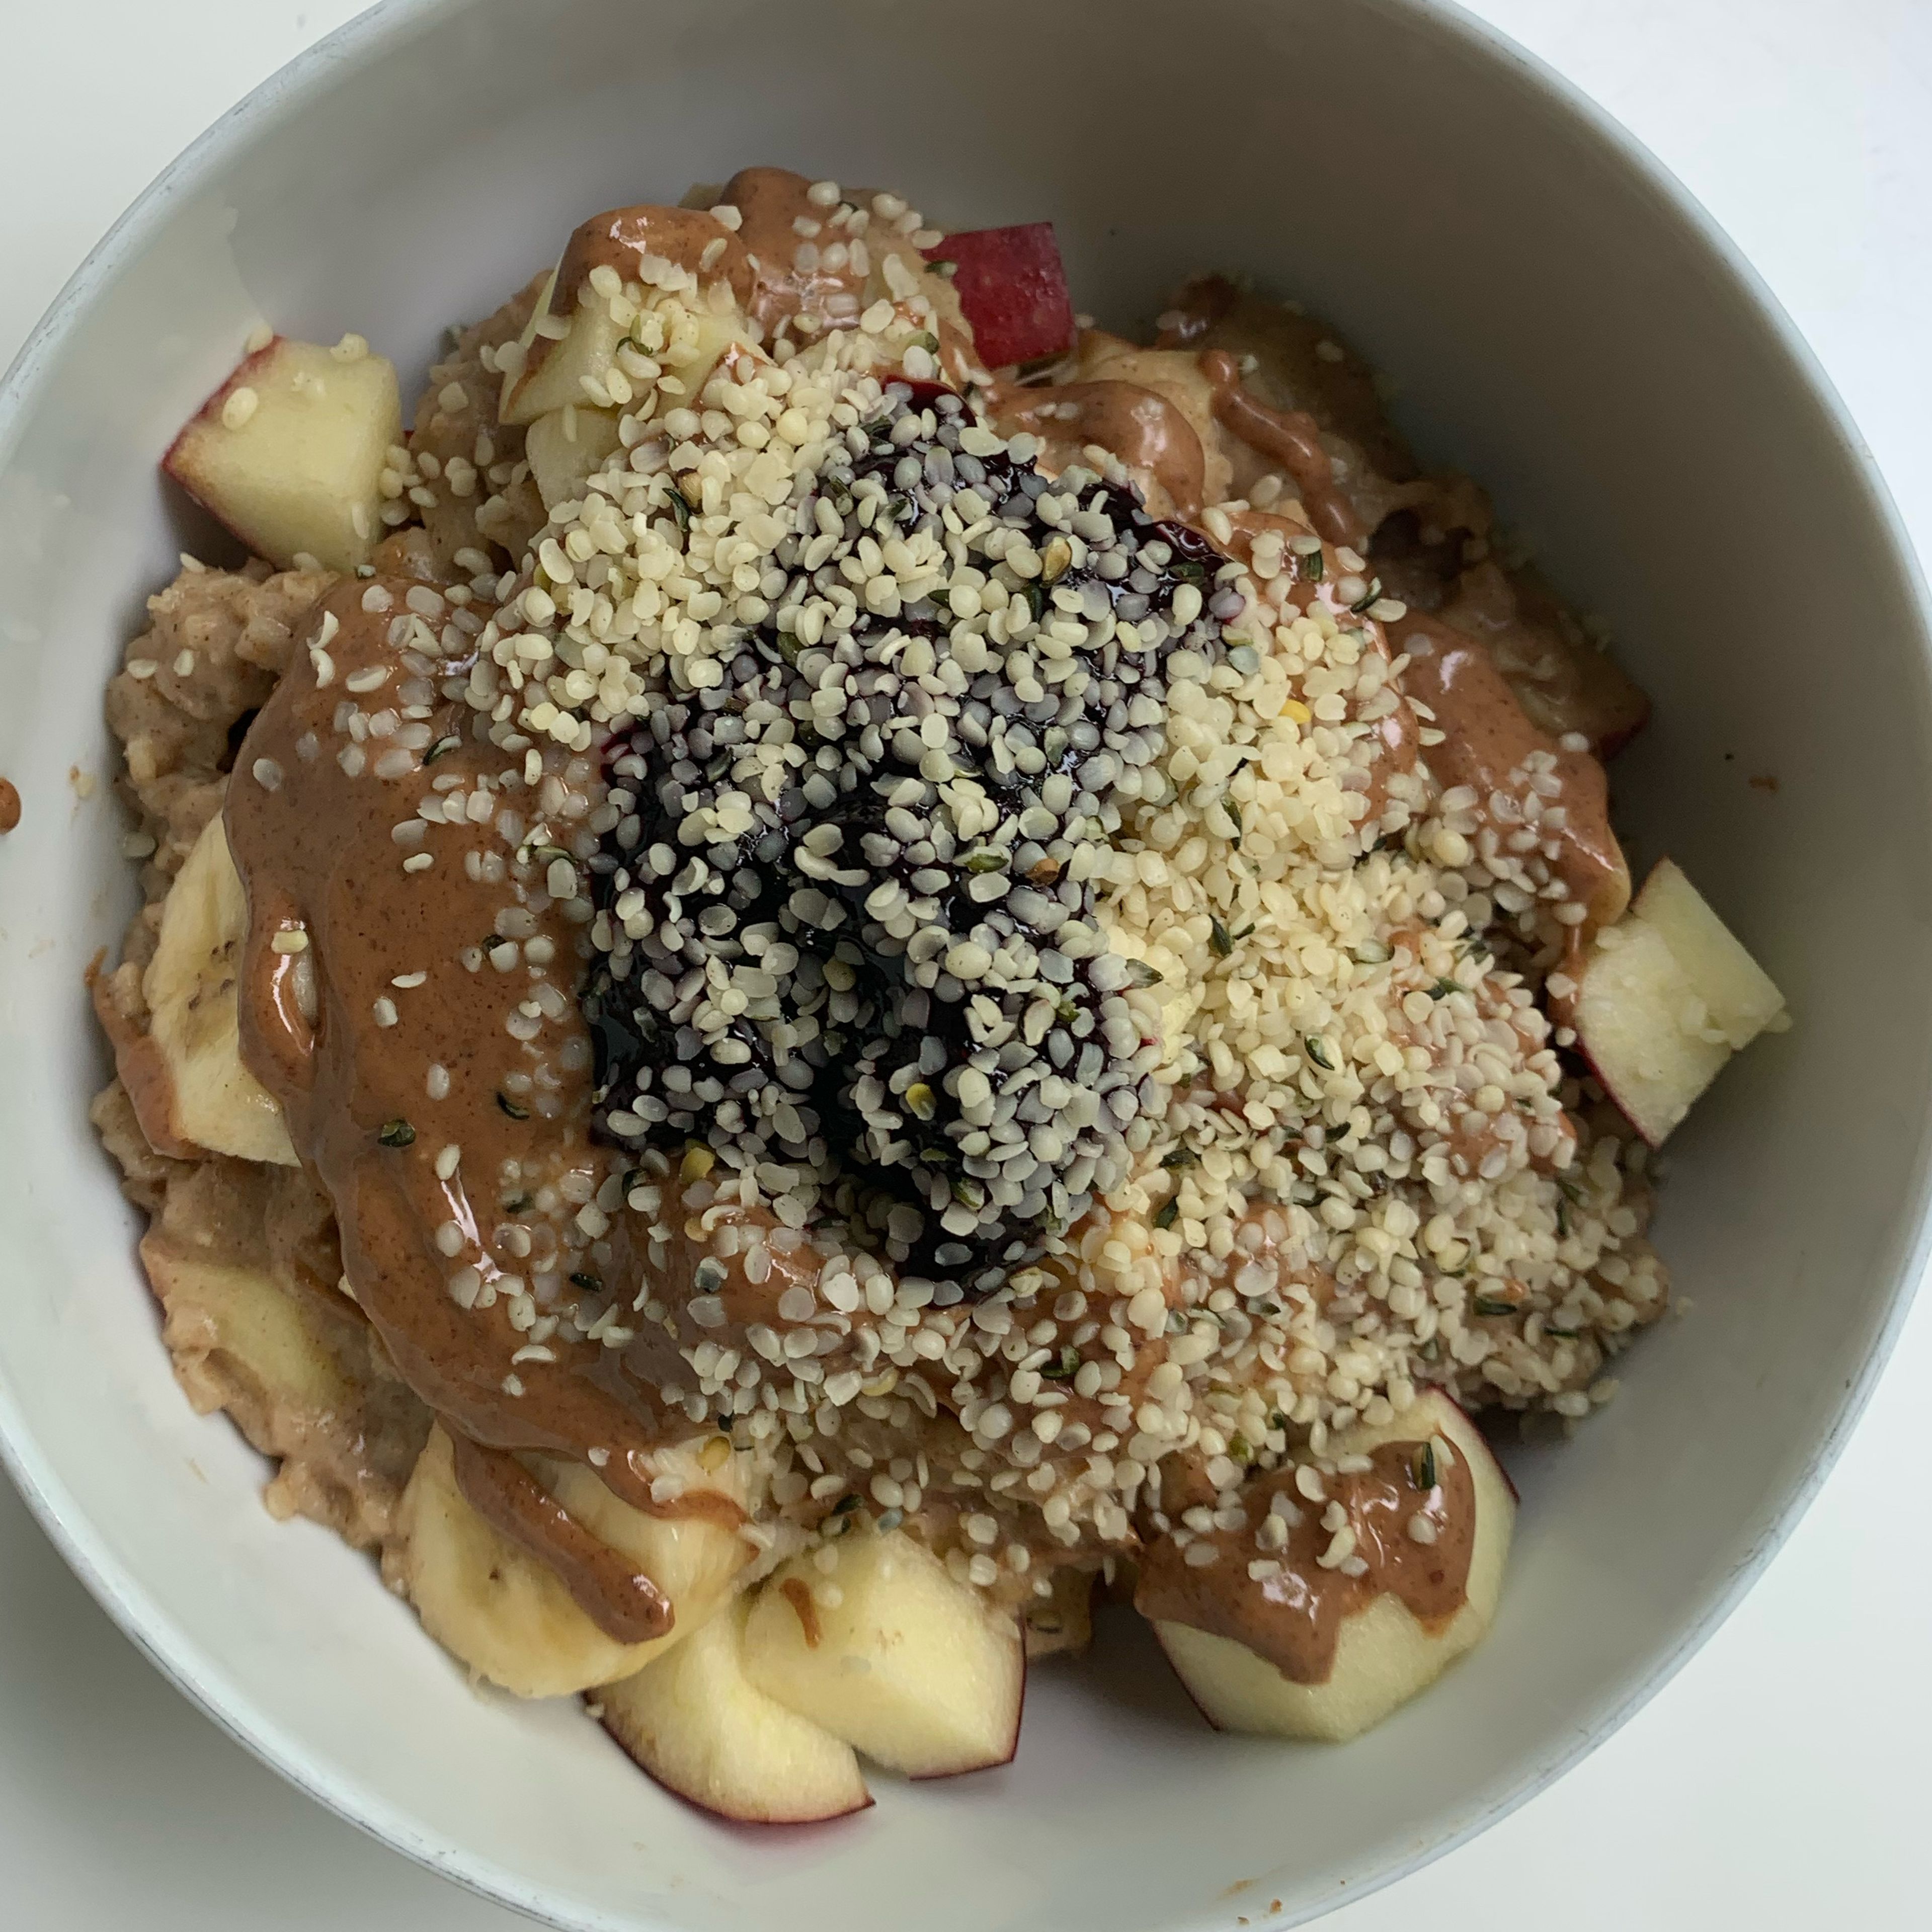 Pour the porridge into a bowl and place the remaining fruits and top. Top with the almond butter, the berry compote and hemp seeds. Enjoy :)